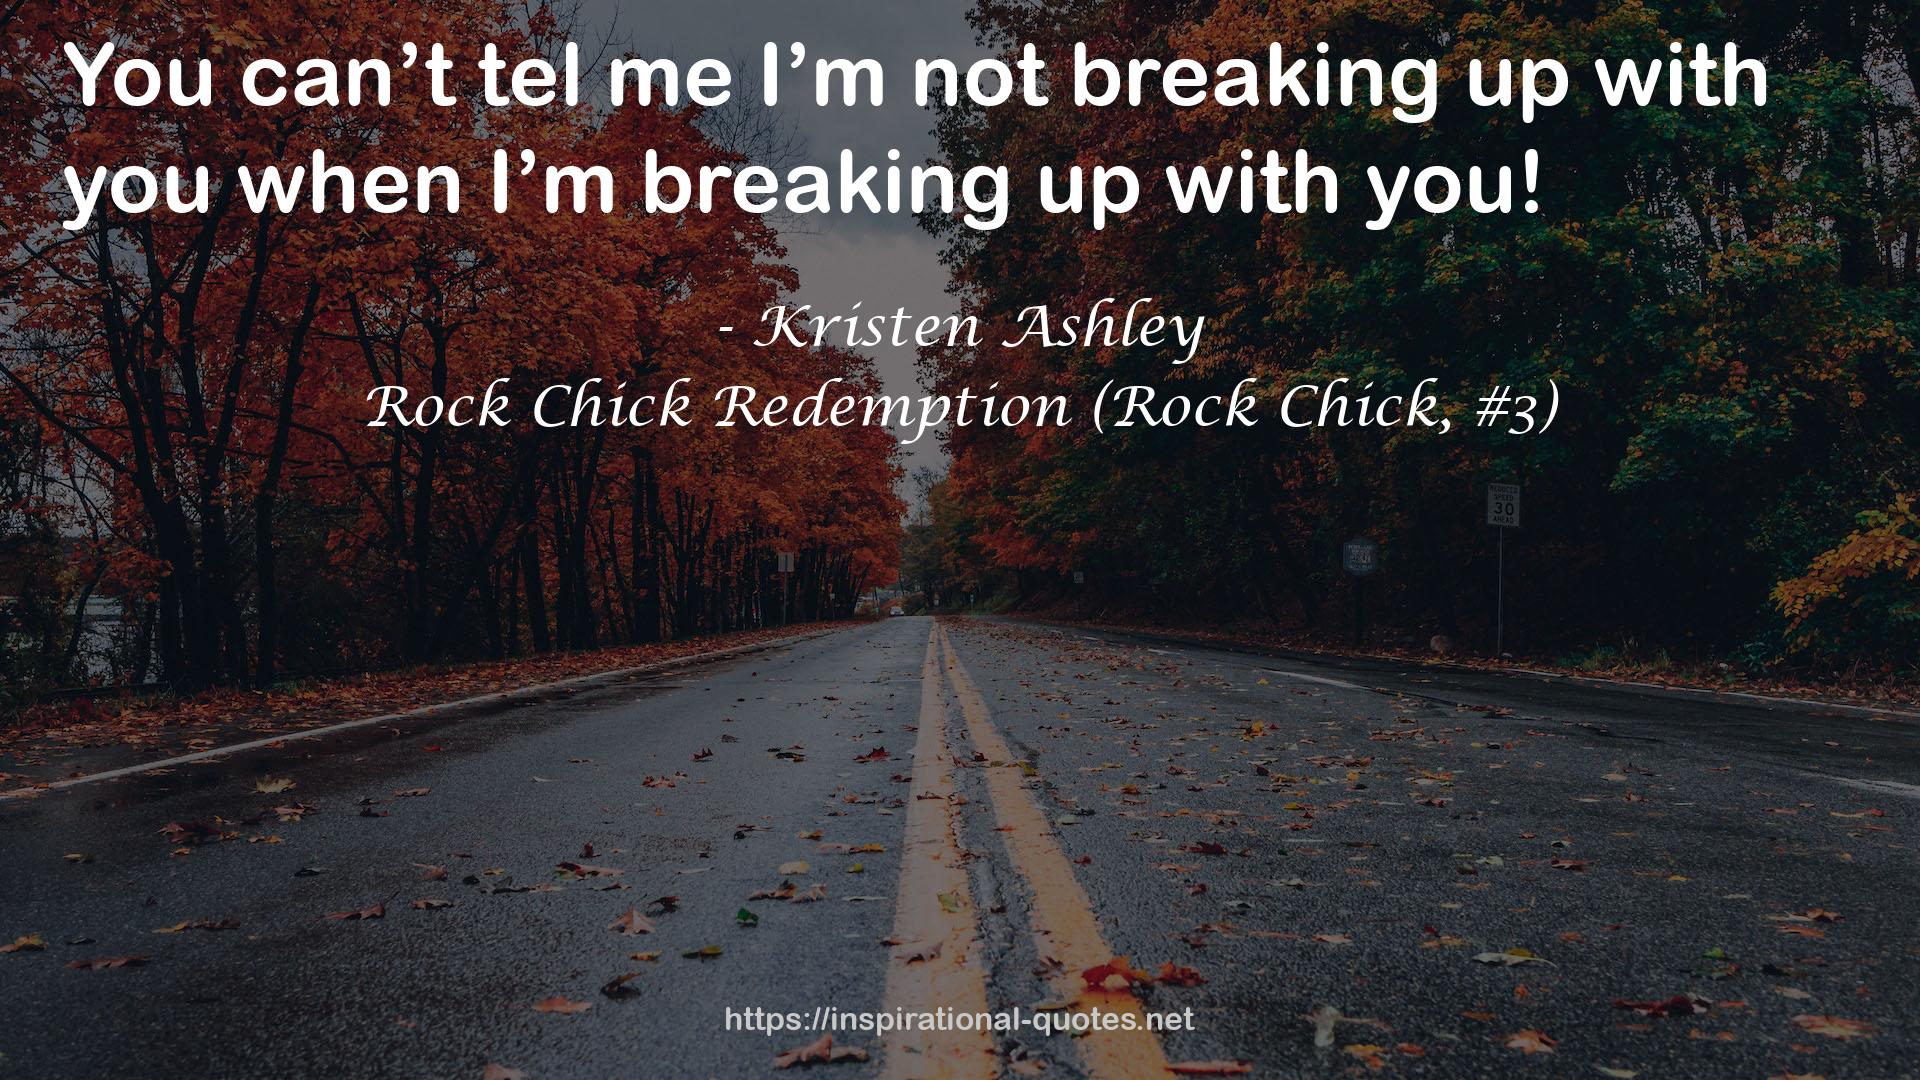 Rock Chick Redemption (Rock Chick, #3) QUOTES